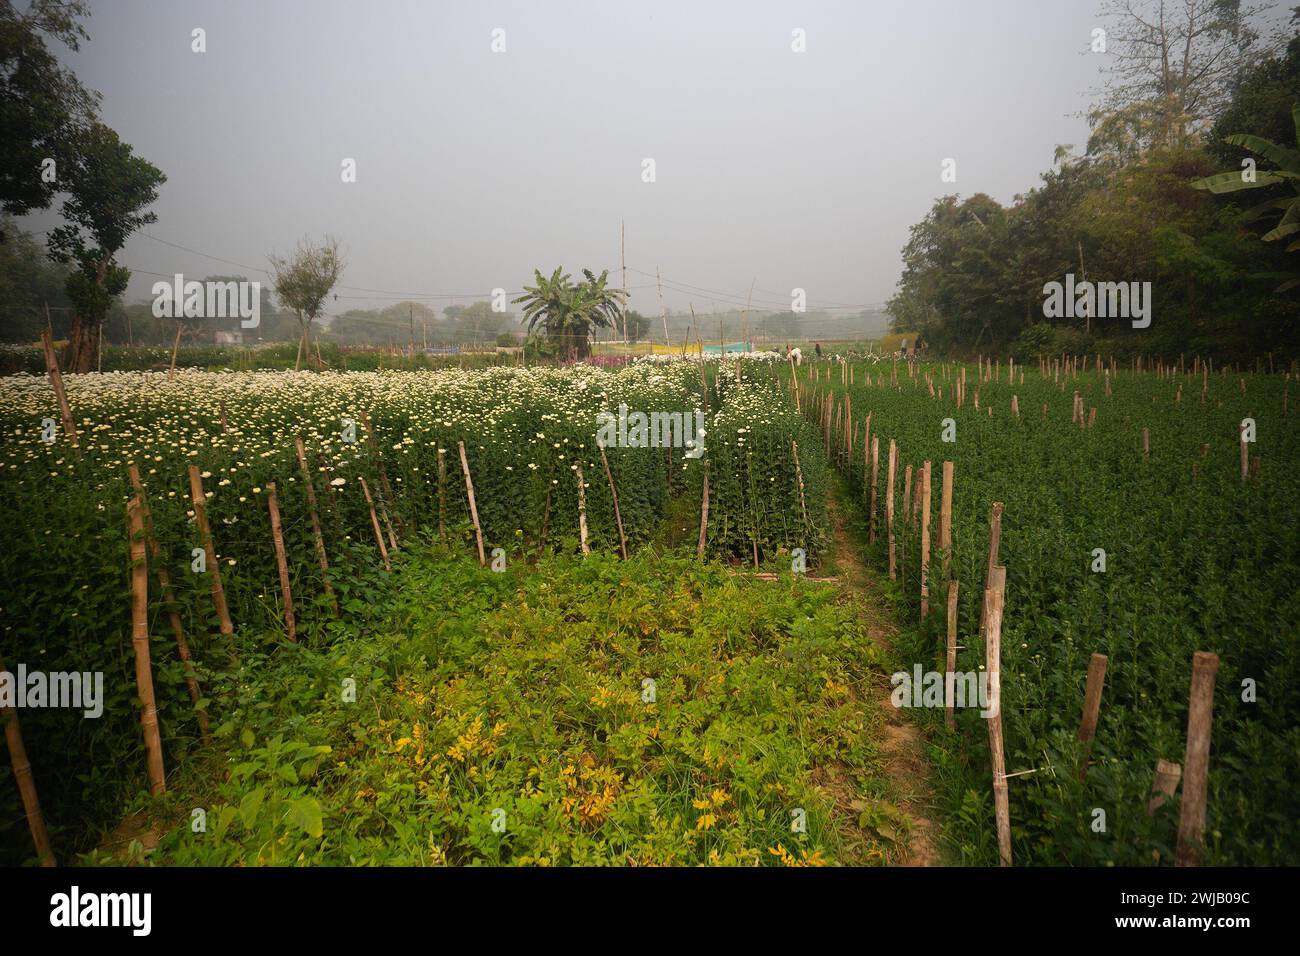 Vast field of budding Chrysanthemums, Chandramalika, Chandramallika, mums , chrysanths, genus Chrysanthemum, family Asteraceae. Winter morning. Stock Photo